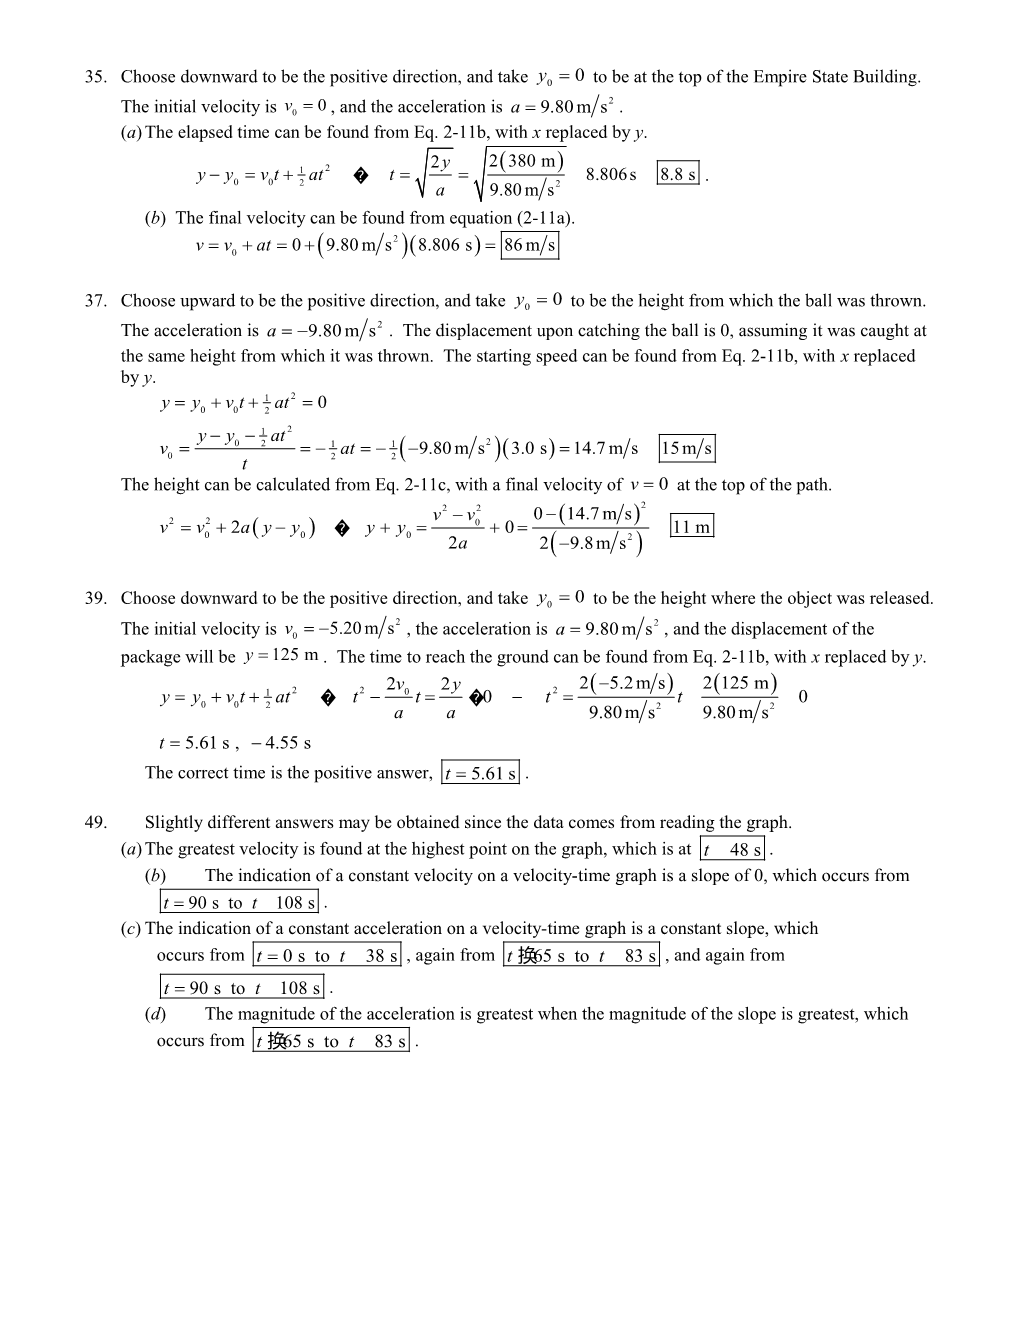 Solutions Chapter 2 1 to 2 7